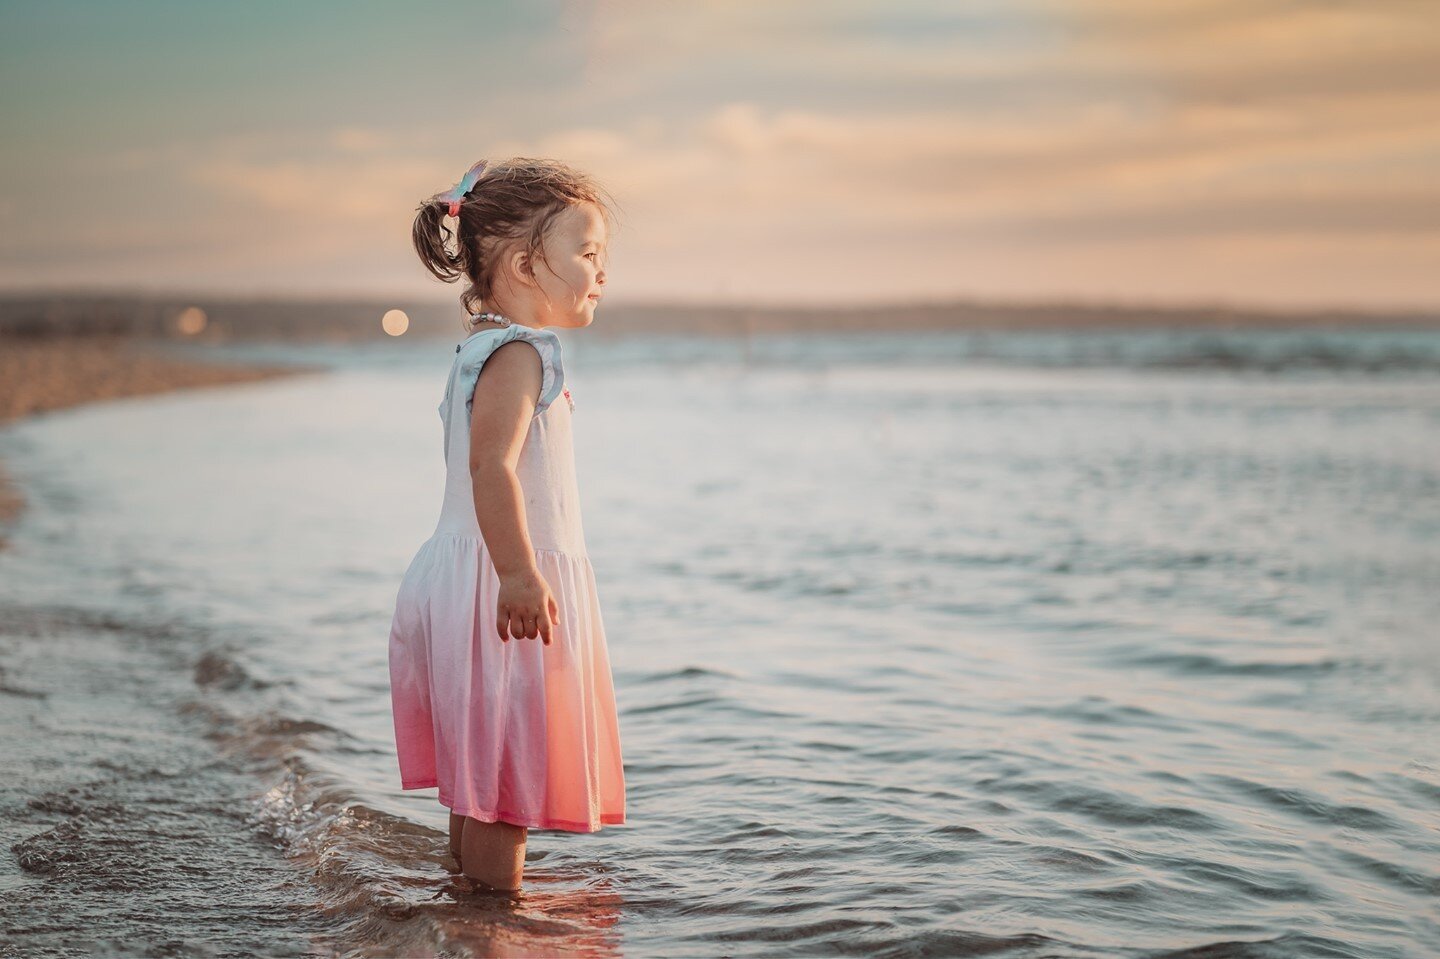 This little girl kept me (and her parents) pretty busy running around during this session. She was just mesmerised by the water and the colours of the sunset reflecting off the surrounds. I love watching kids soak up the beauty of the beach, and of c